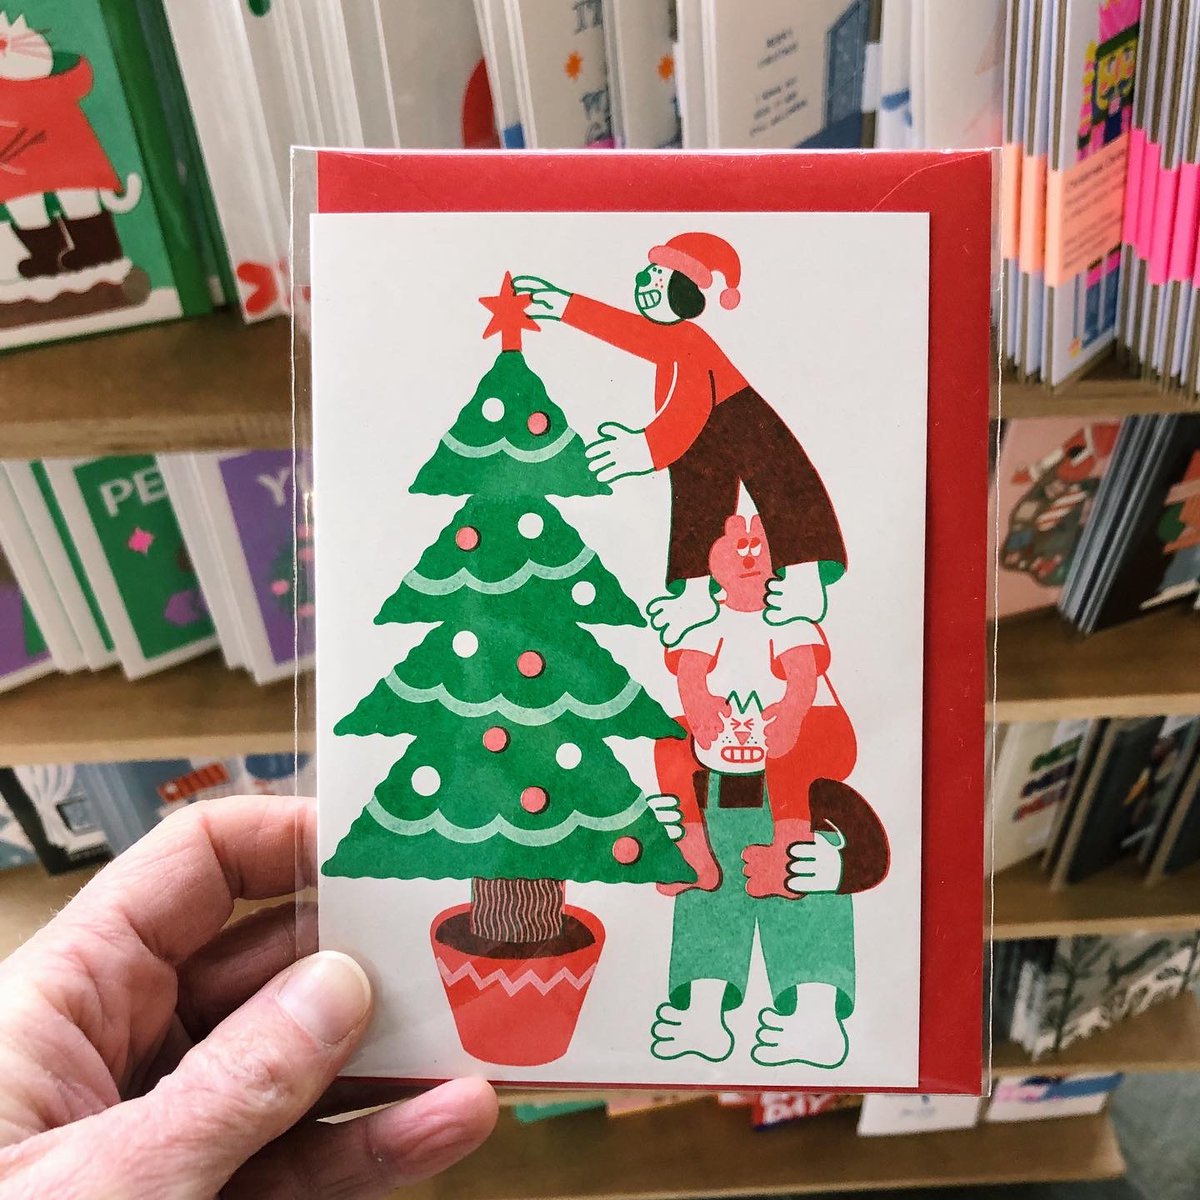 Feeling festive? Lots of stocking fillers and christmas cards in store, come say hello @yartspace Persistence Works Gallery, Sheffield. Featuring 40 makers including @helenhancocks @YUKFUNWOW